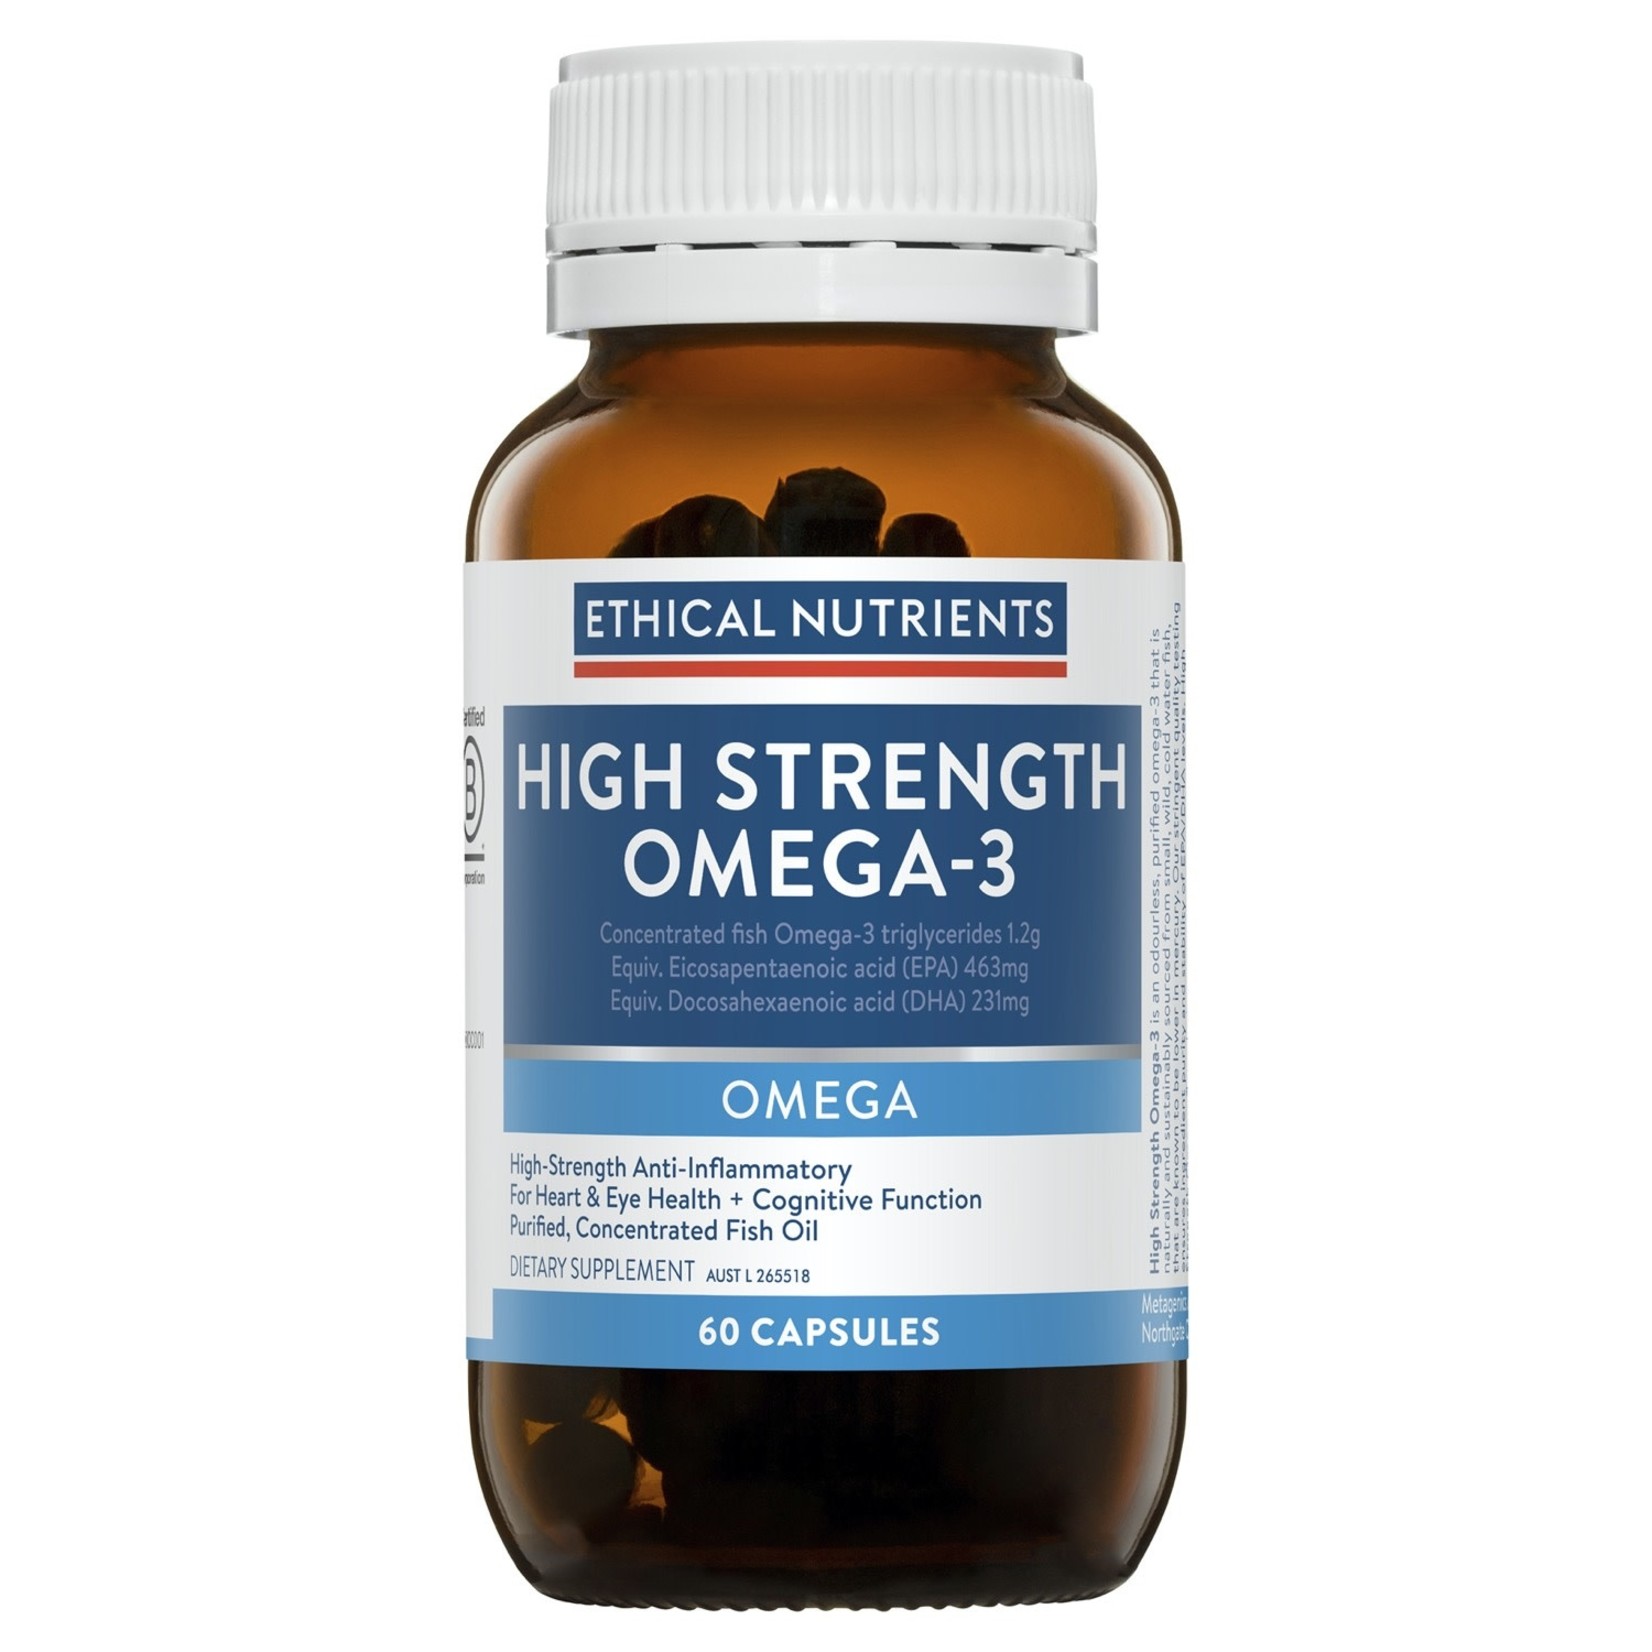 ETHICAL NUTRIENTS Ethical Nutrients Omegazorb  Hi-Strength Omega 3 Fish Oil 60 Capsules